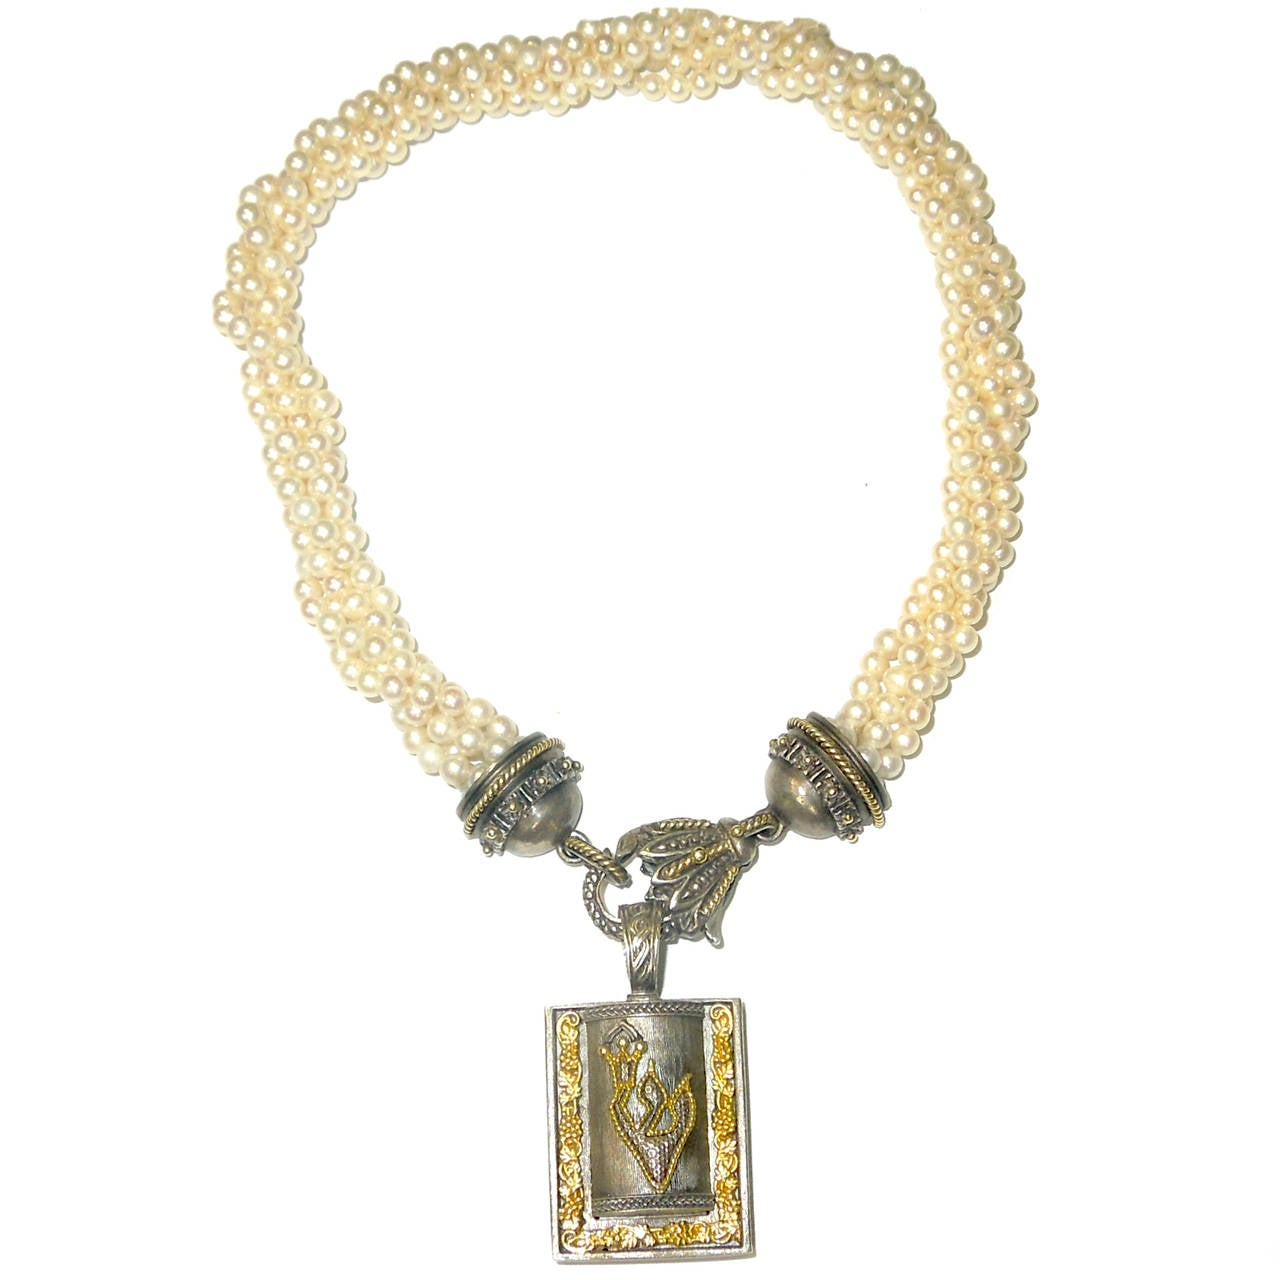 Aged Silver & 18K Gold Mezuzah hung on Fresh Water pearl necklace with Aged Silver clasp.

Mezuzah is a locket that opens and up to keep your prayers

Necklace is made up of 5mm Fresh Water pearls with Aged Silver & 18K Gold Lobster clasp, where